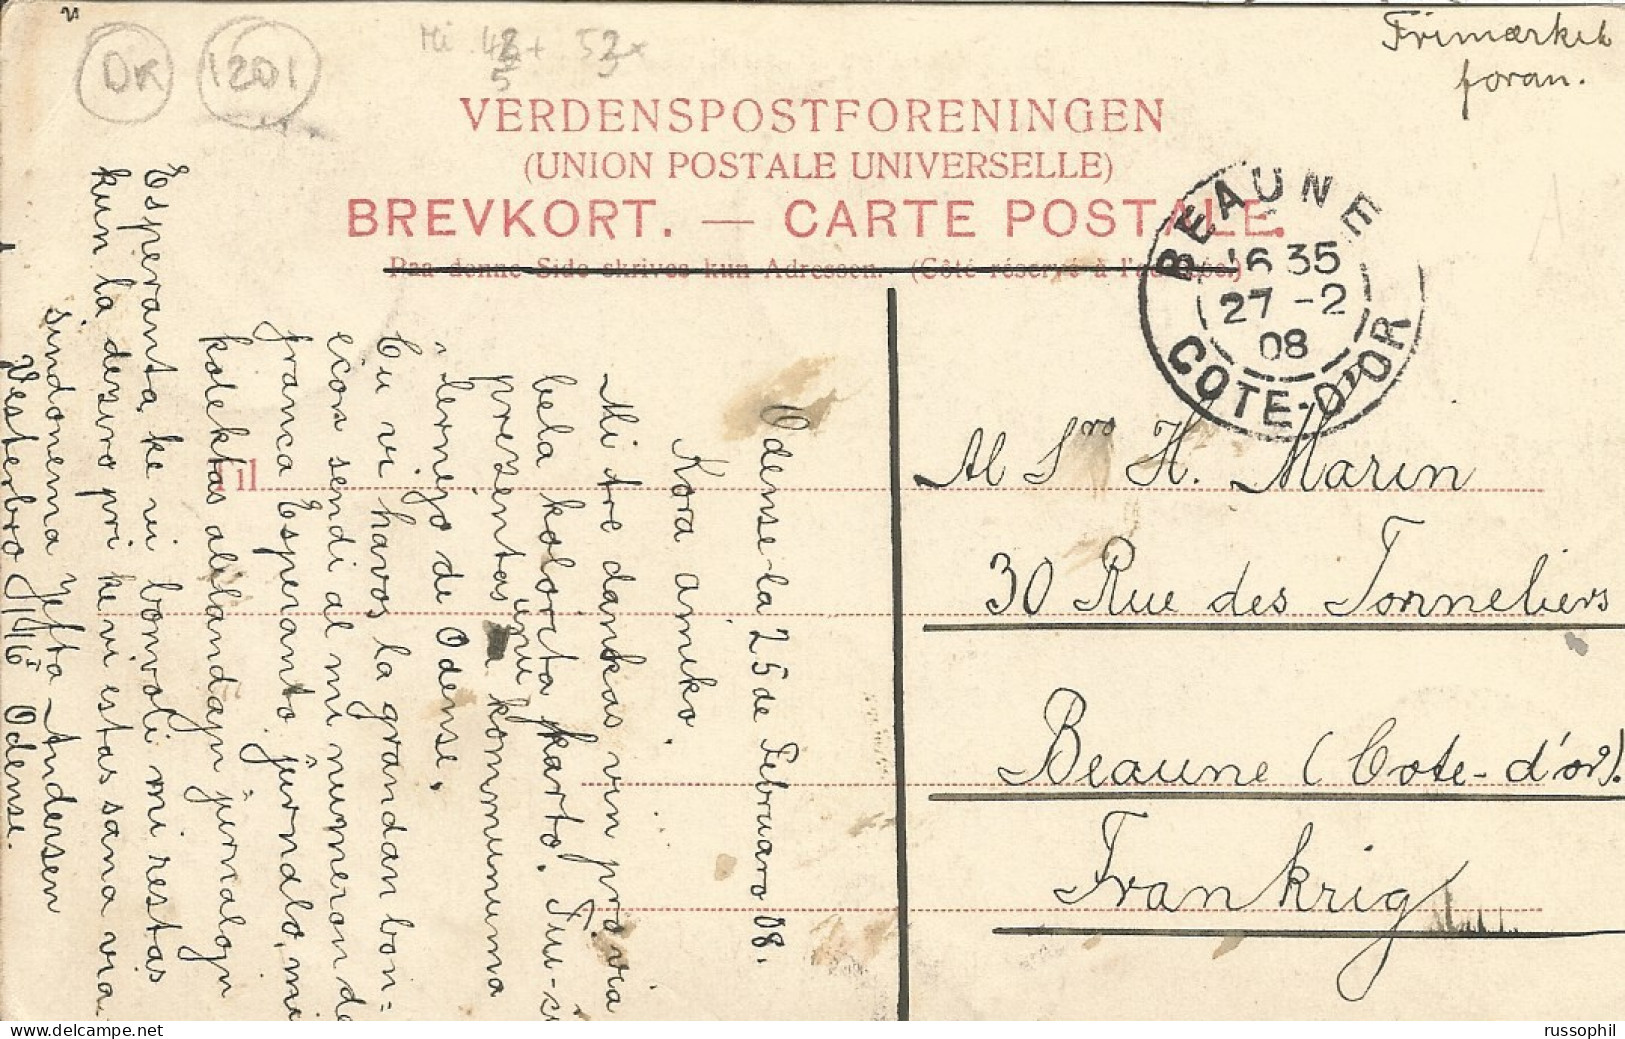 DENMARK - SPECTACULAR 6 STAMP FRANKING (10 ORE) ON PC (VIEW OF ODENSEE) TO FRANCE - 1908 - Storia Postale